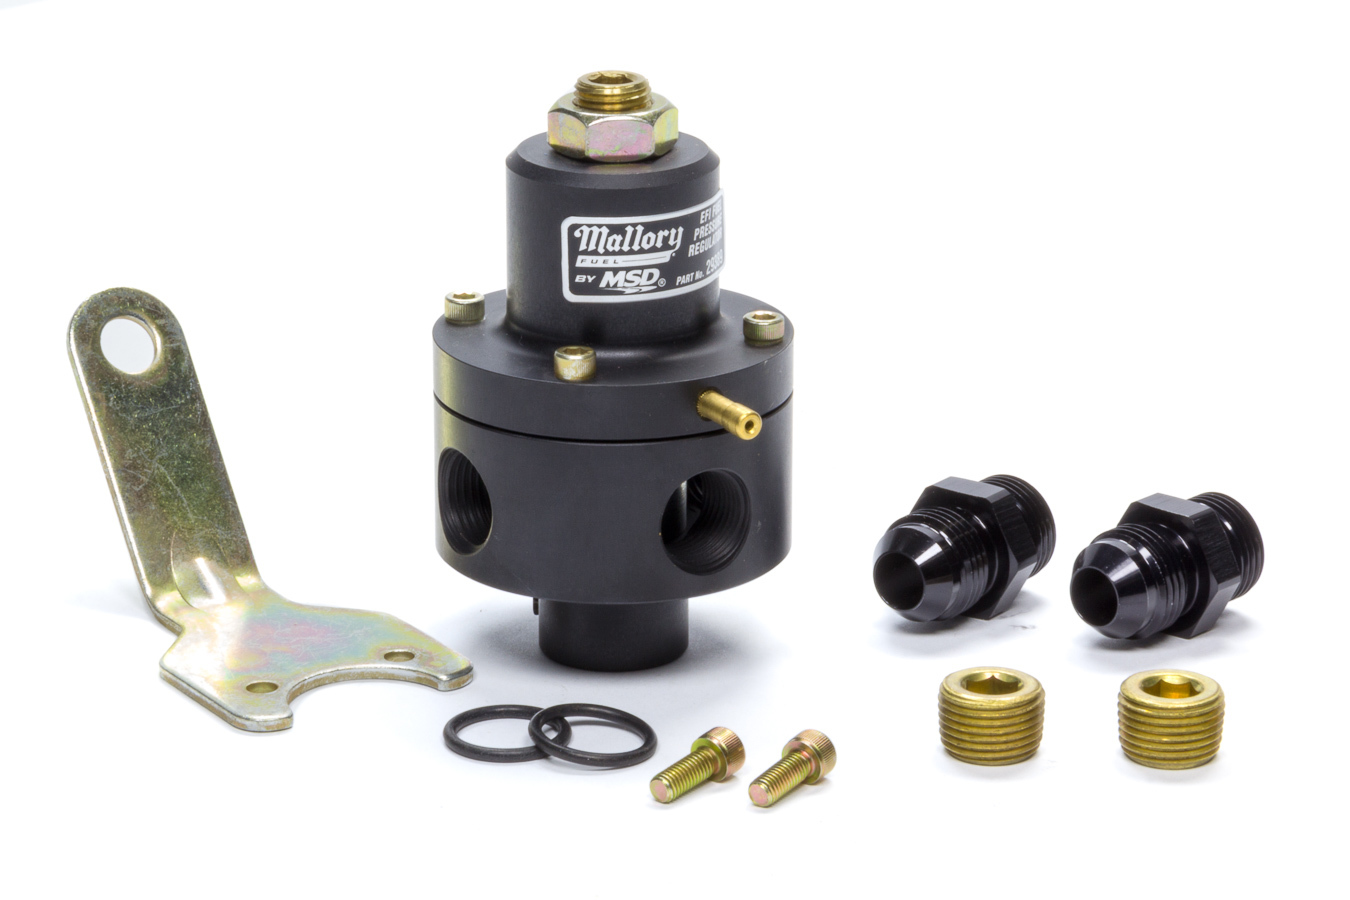 Mallory 29389 Fuel Pressure Regulator, 30 to 100 psi, In-Line, Return Style, 8 AN Female O-Ring Inlet, Three 3/8 in NPT Female Outlets, 8 AN Female O-Ring Return, Bypass, Fittings Included, Aluminum, Black Anodized, Gas, Each